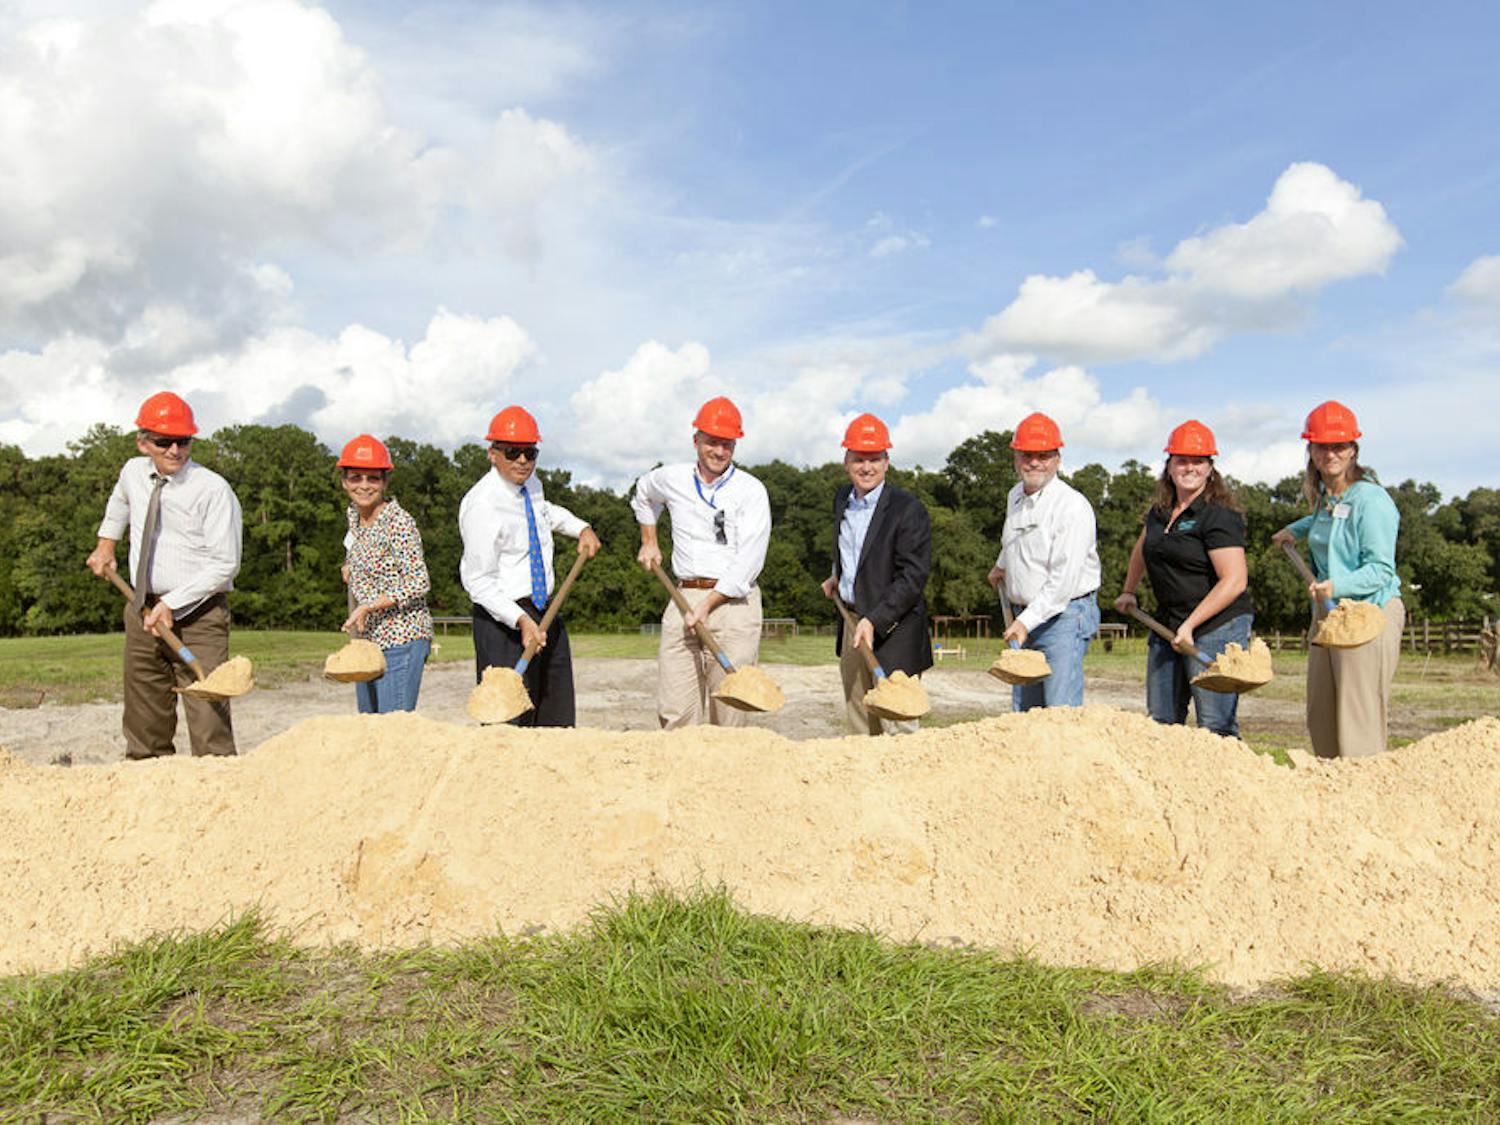 A group of Florida cattlemen and executives break ground for the construction of the UF/IFAS Beef Teaching Unit, 3301 23rd Terrace, on Sept. 10, 2015. The 80-acre farm will house a new cattle processing facility and student housing that will be used by animal science students for research.